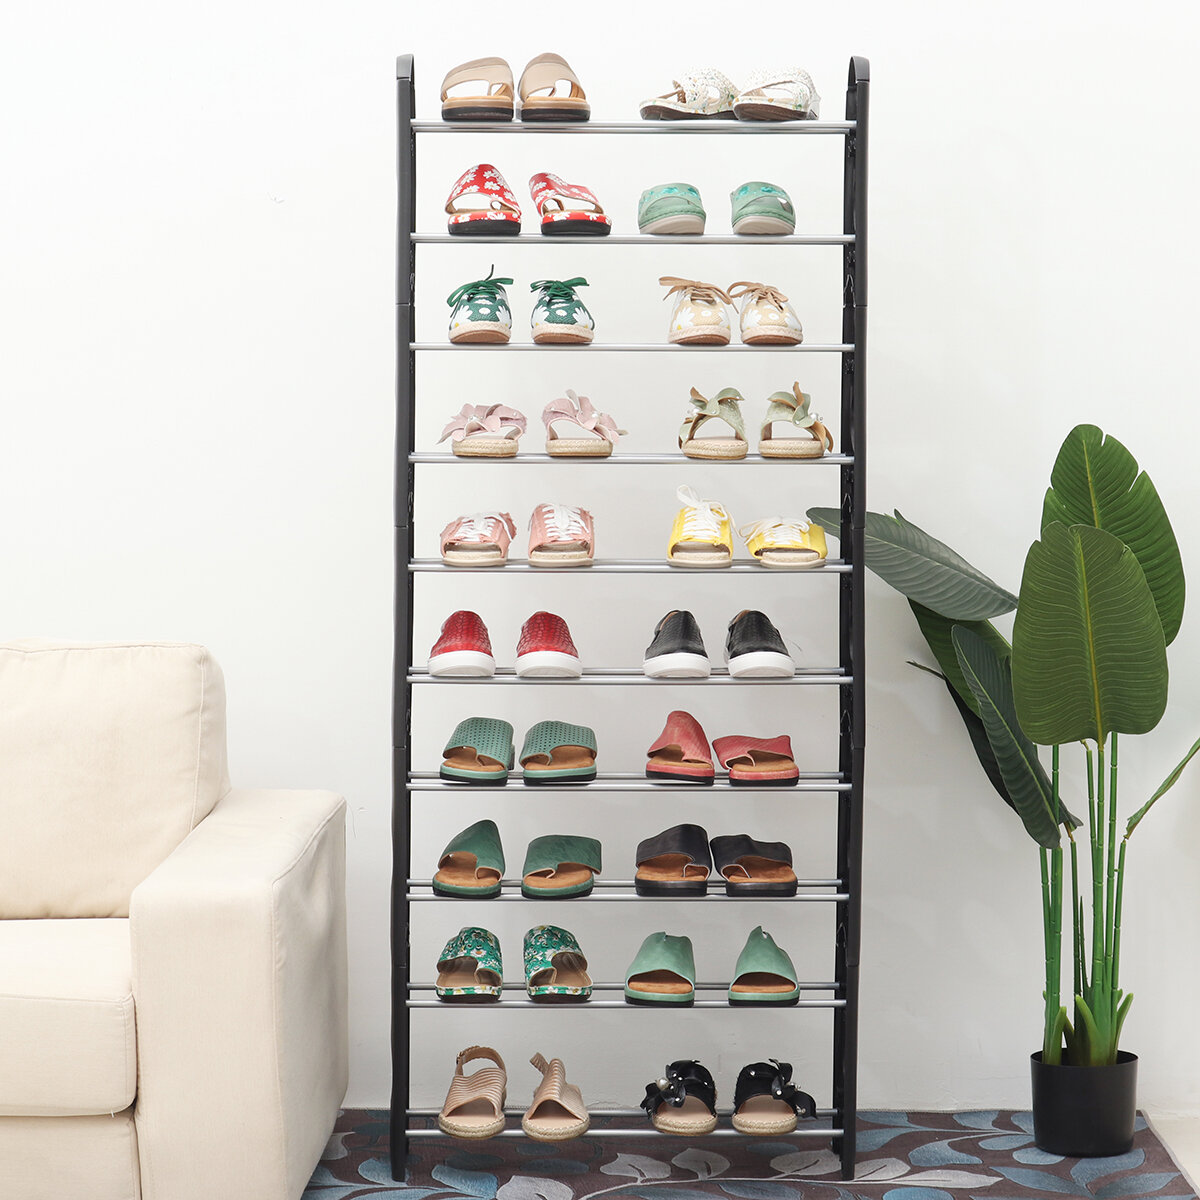 Multi-layer Shoe Rack Portable Saving Space for Home Dorm Stand Holder Shoe Shelf Organizer Shoes Cabinet